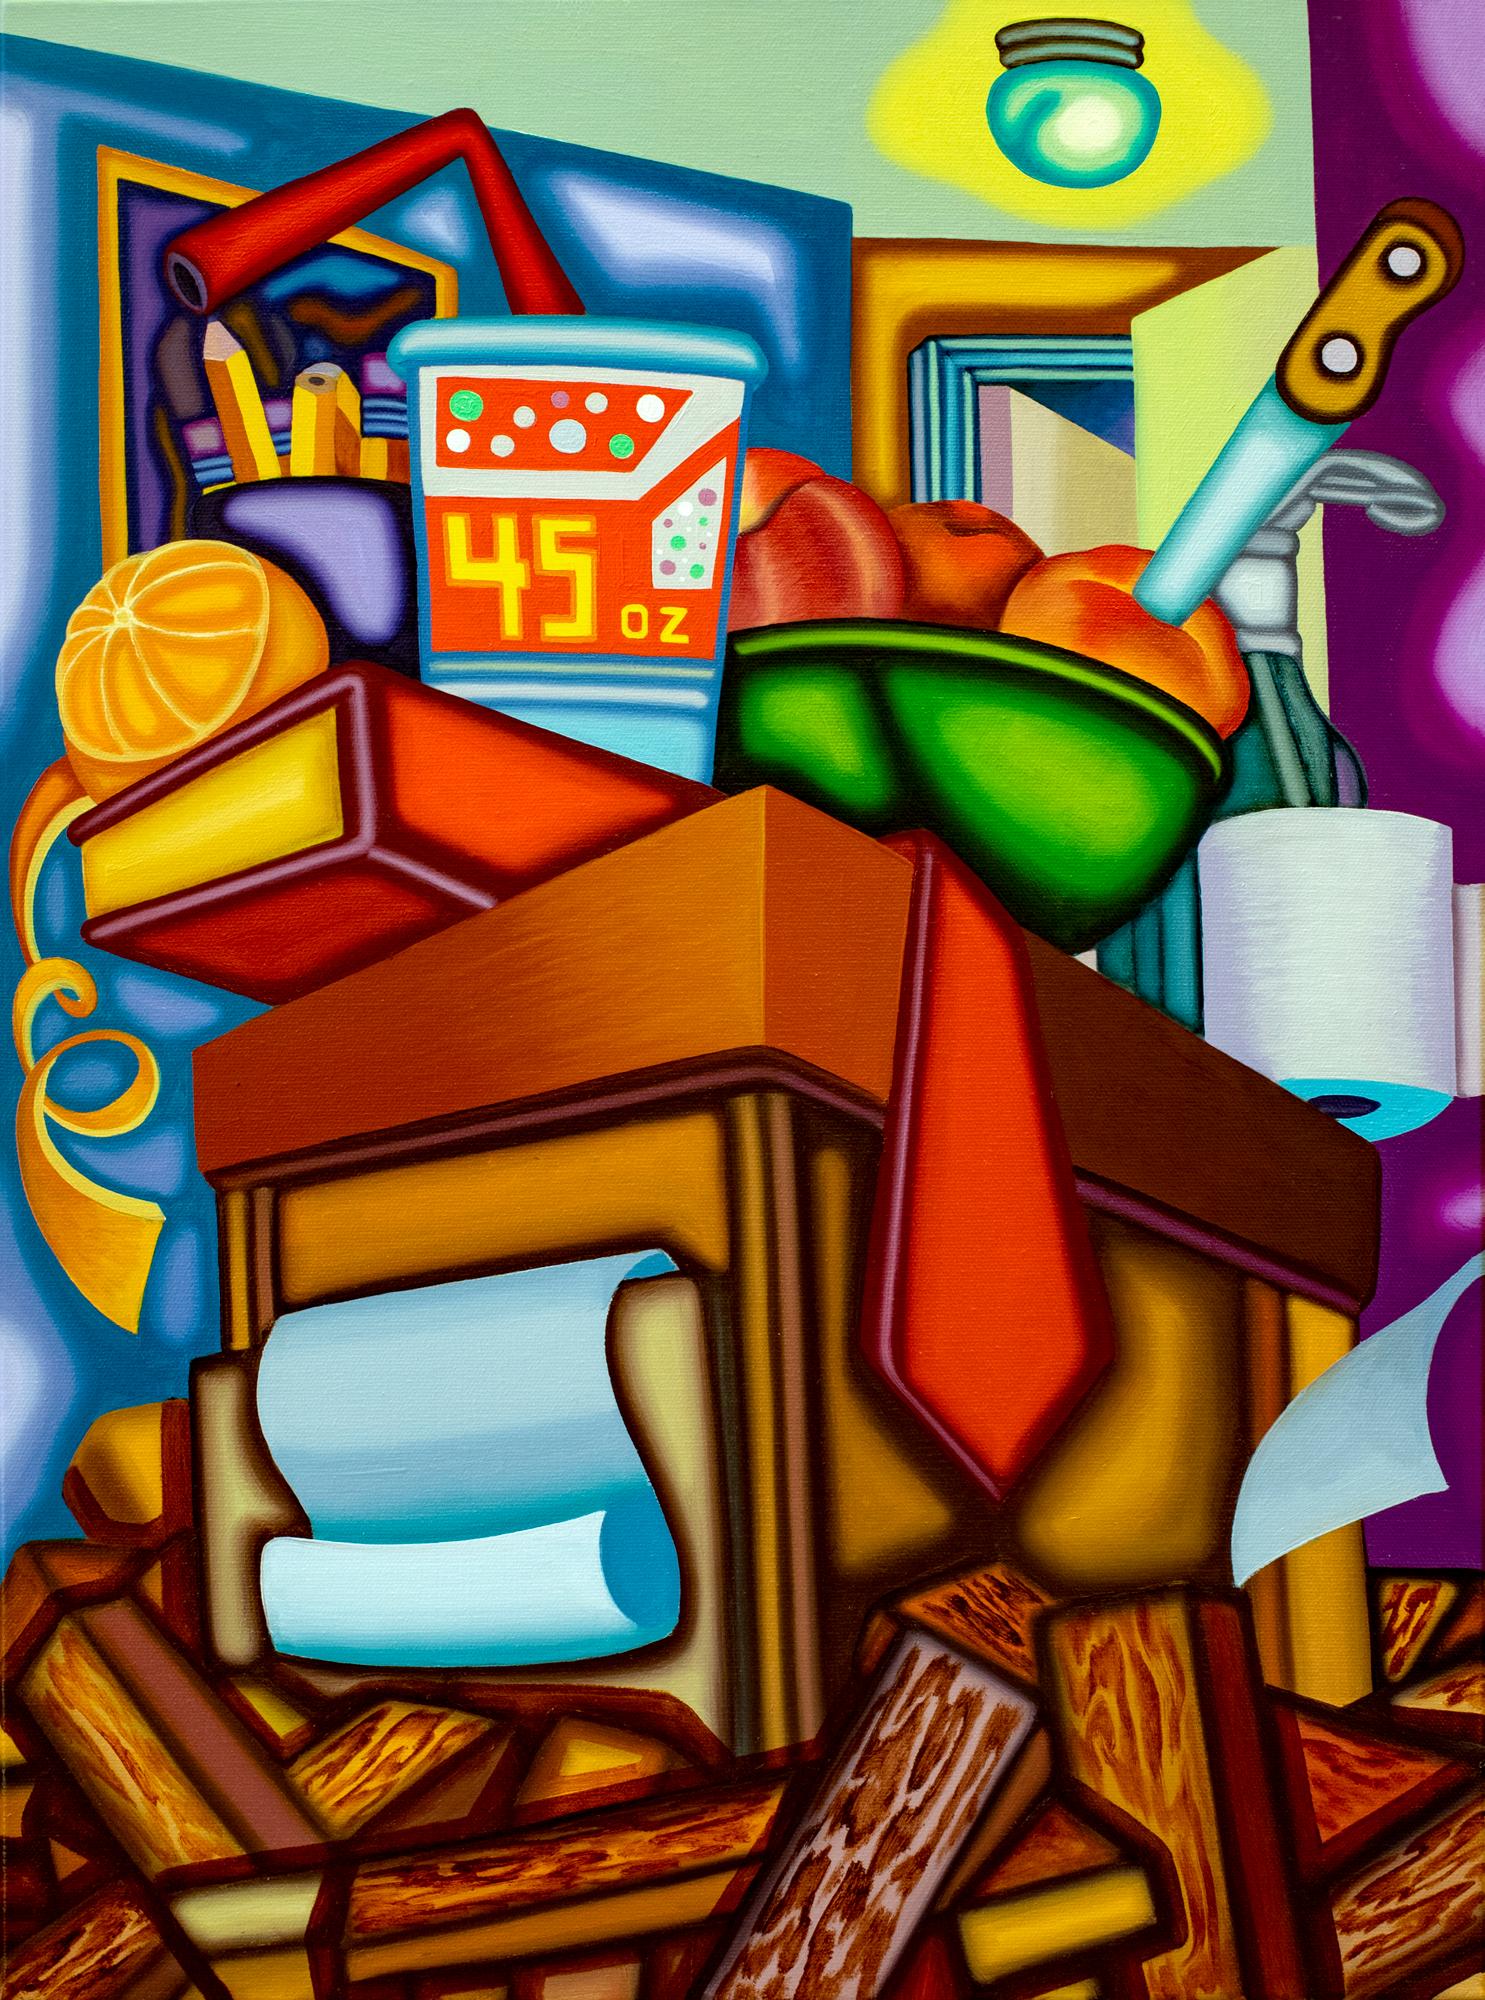 Jason Stout Interior Painting - AS ABOVE SO BELOW - Cubist, Surreal Still Life with Bold Colors